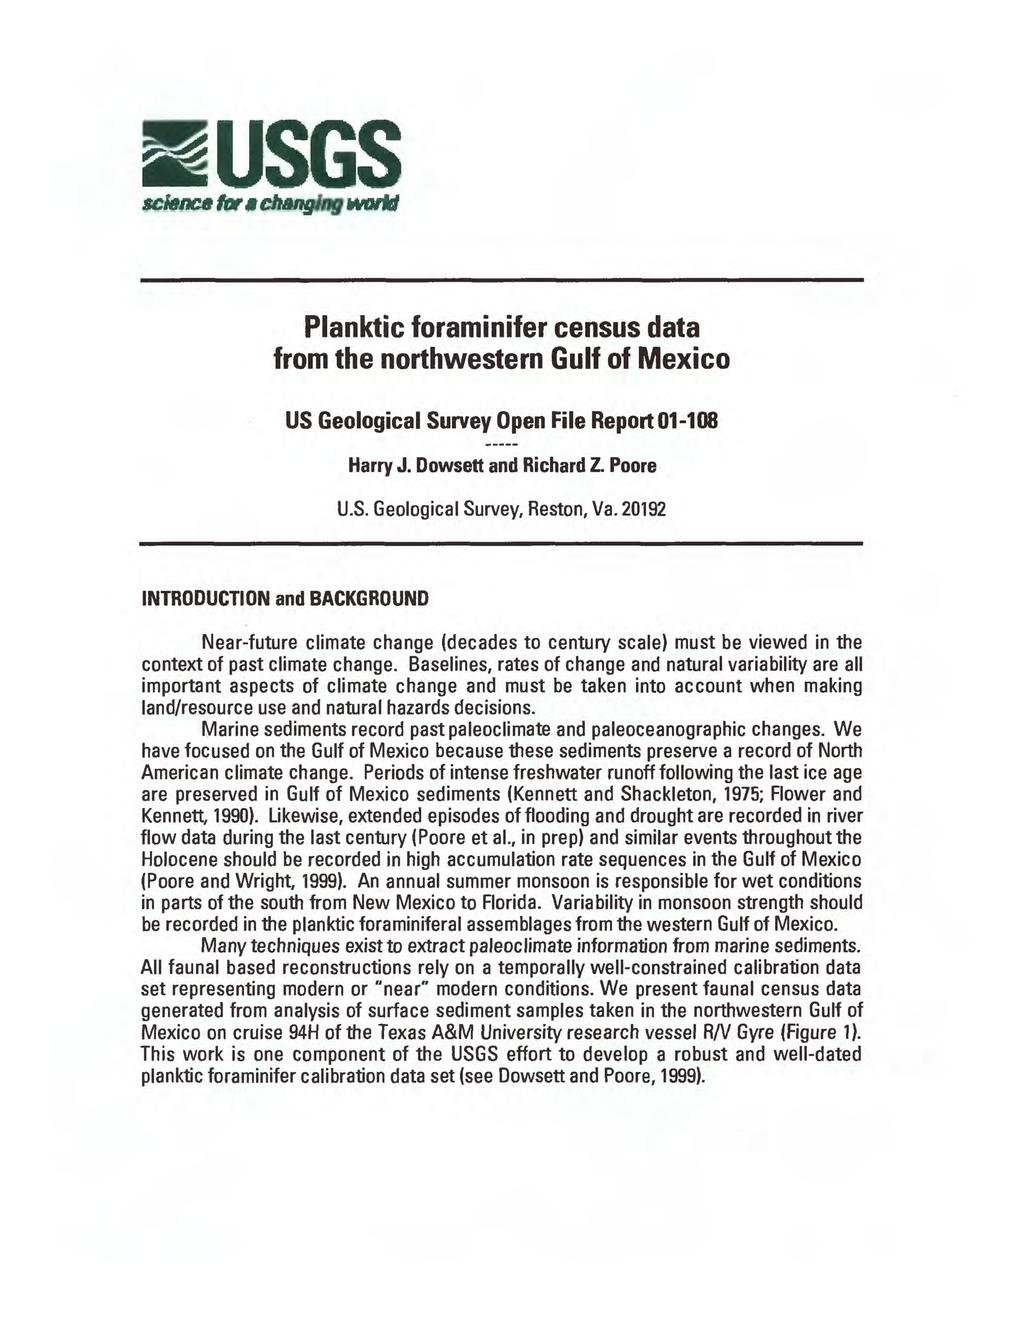 USGS science formcttanging uwu Planktic foraminifer census data from the northwestern Gulf of Mexico US Geological Survey Open File Report 01-108 Harry J. Dowsett and Richard Z. Poore U.S. Geological Survey, Reston, Va.